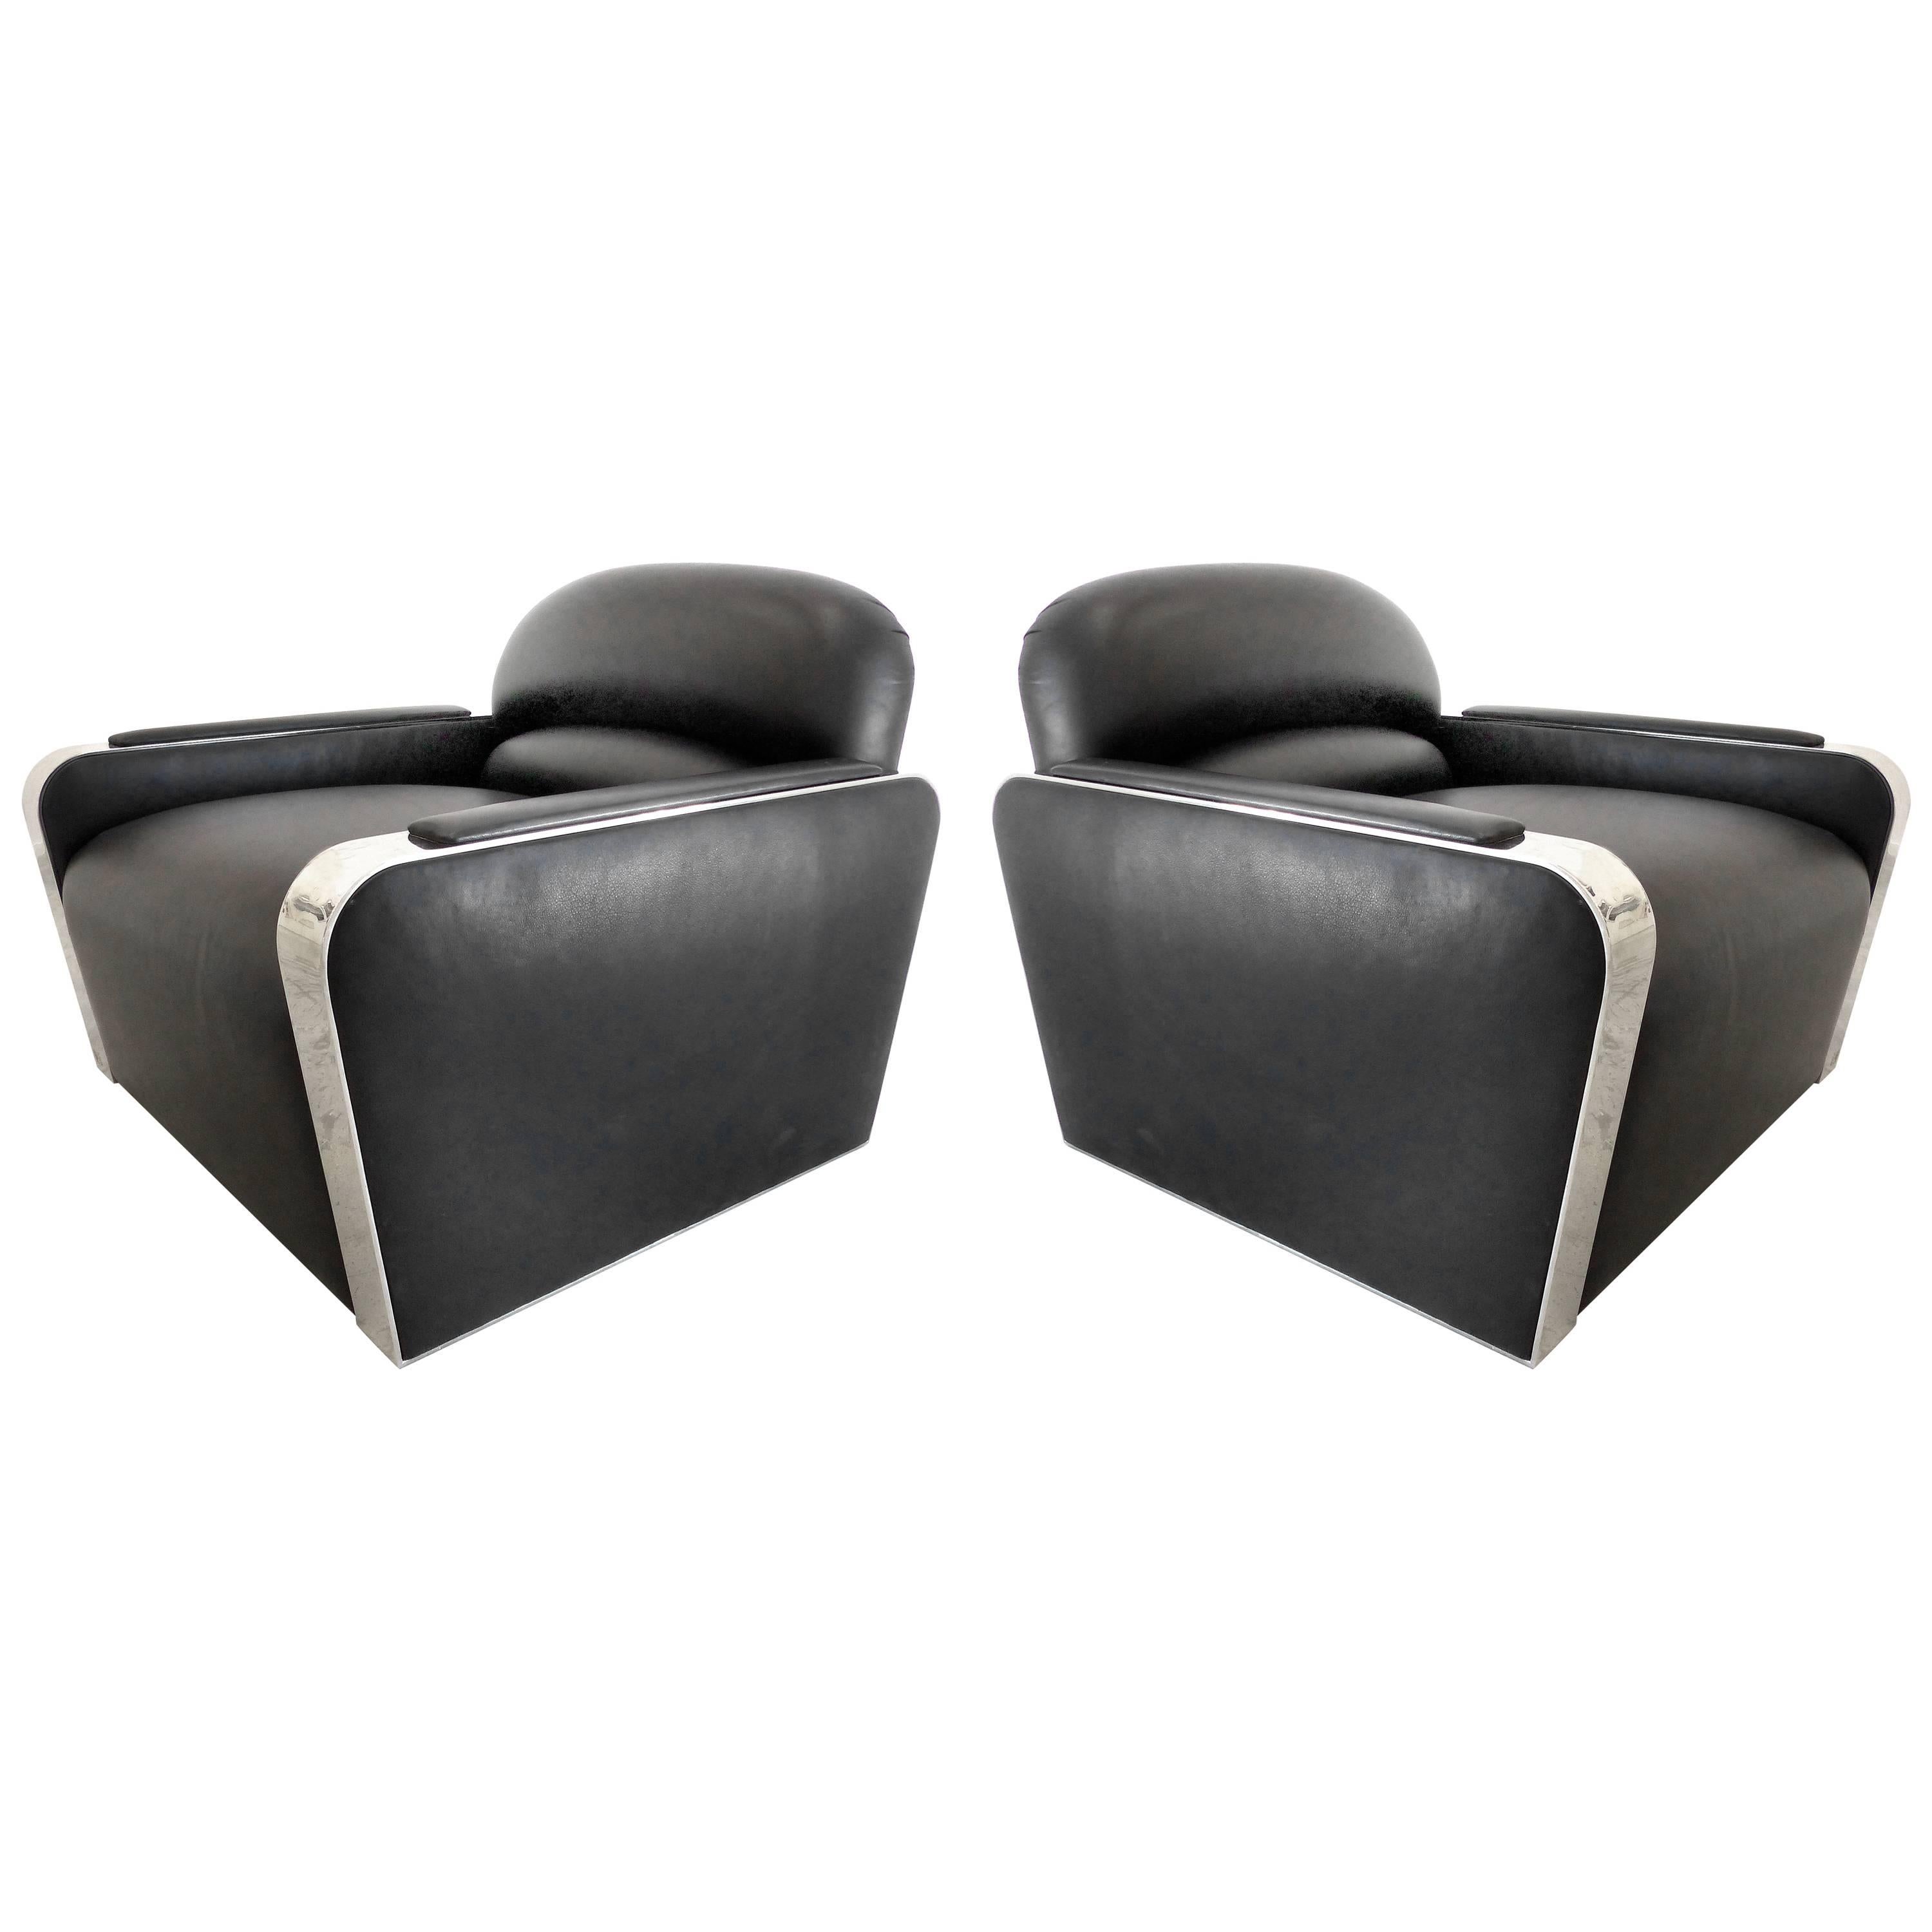 Stanley Jay Friedman for Brueton Stainless and Leather Habana Chairs, Pair